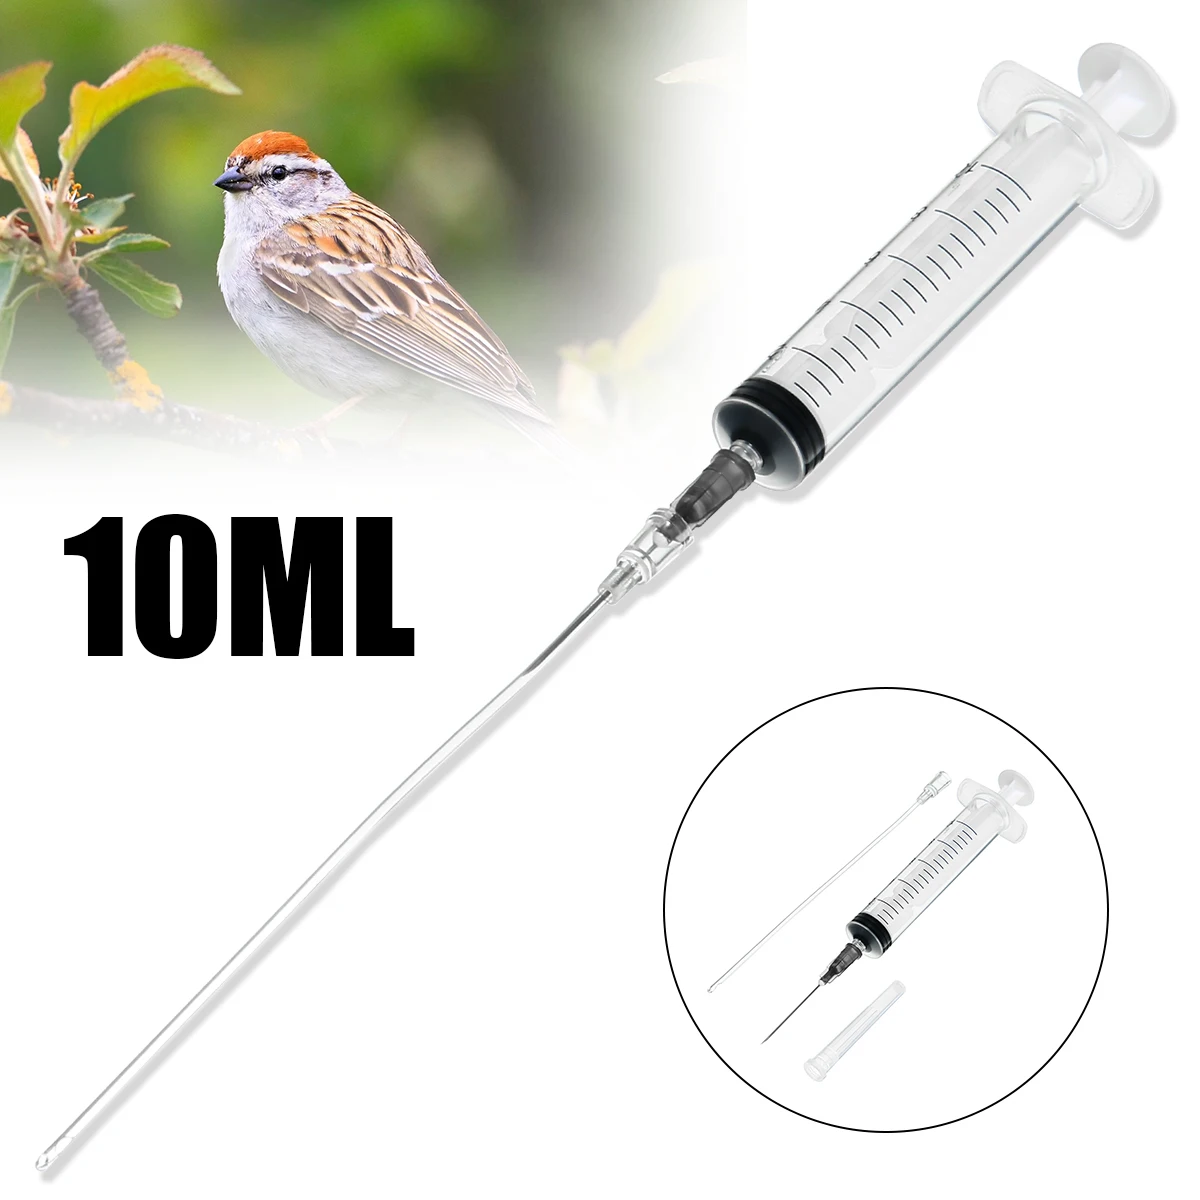 3pcs Baby Bird Budgie Parrot Hand Rearing Feeding Syringes Crop Tubes lots  s